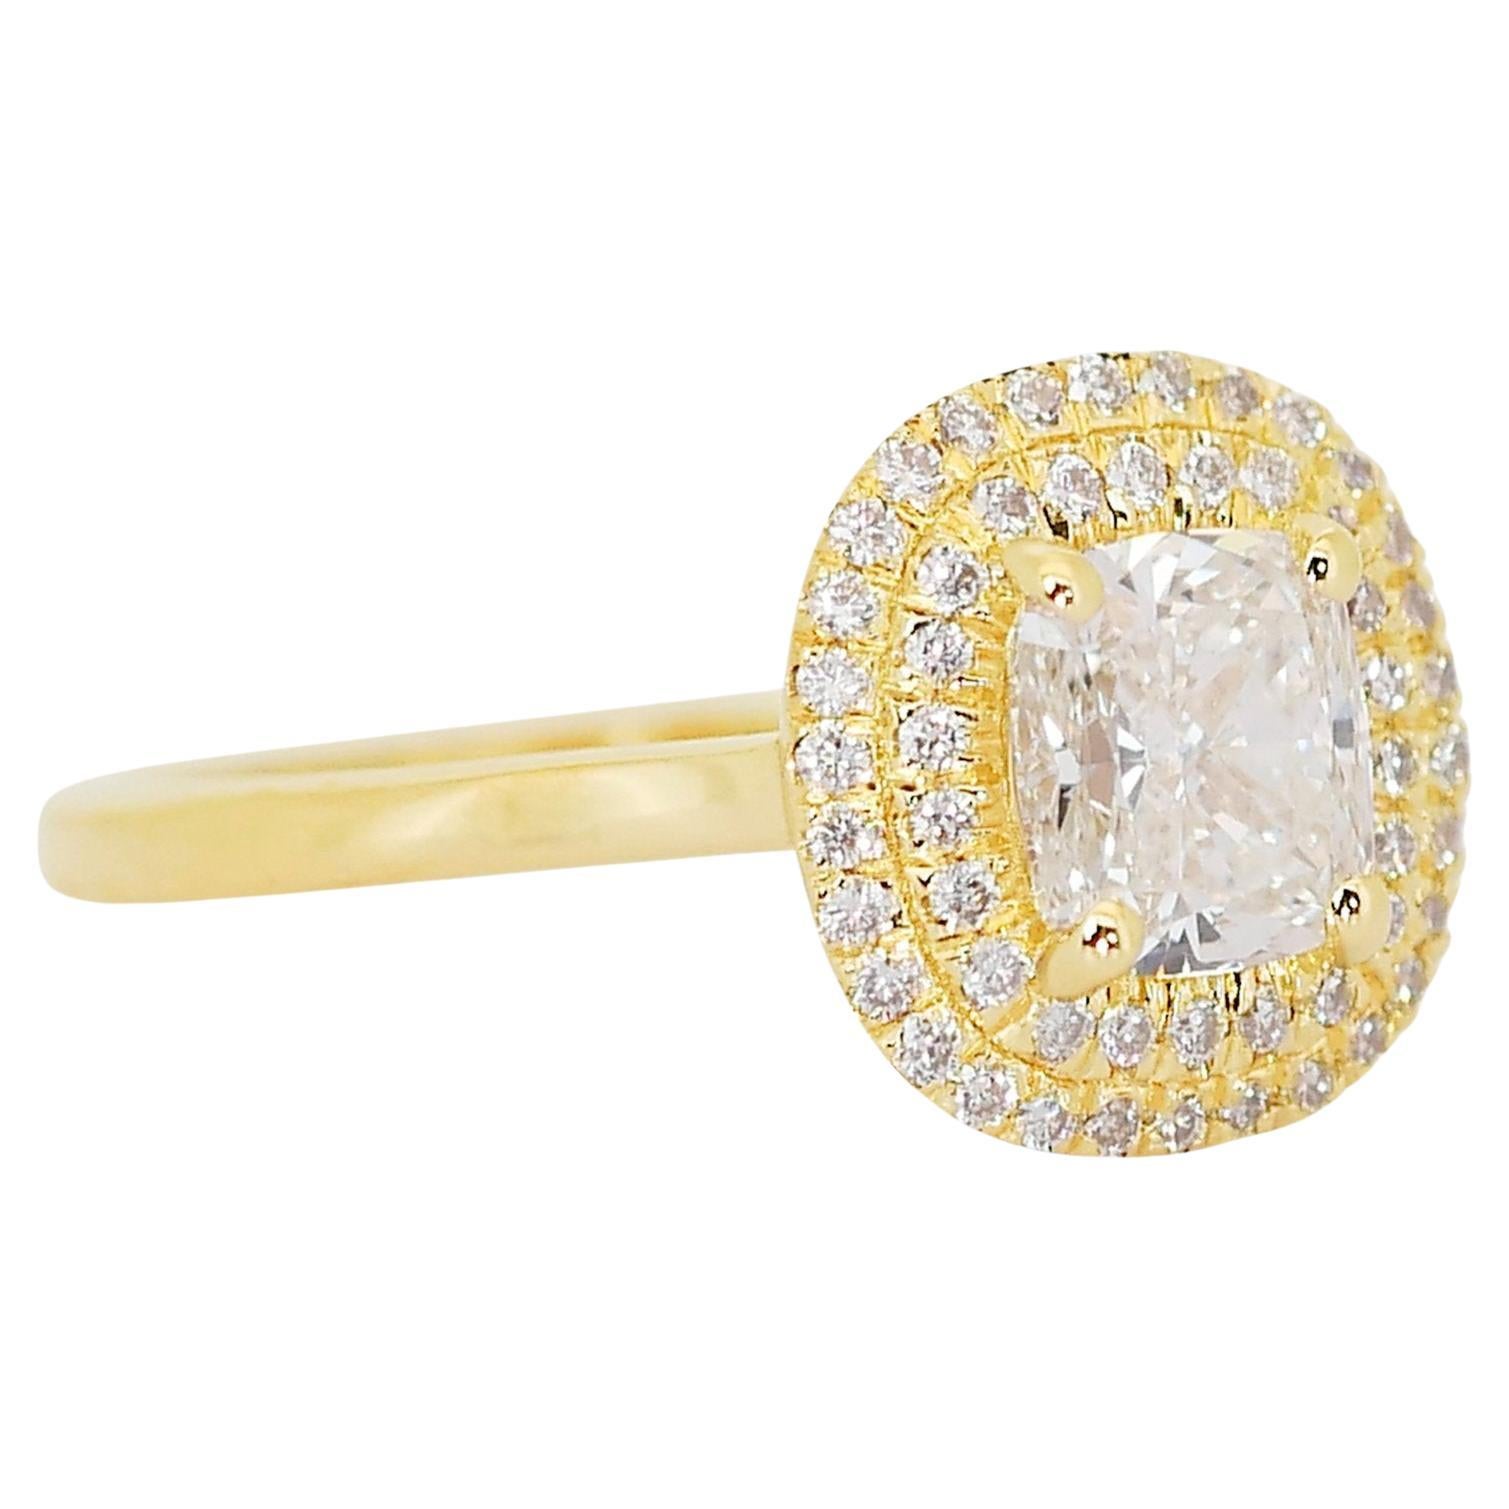 Majestic 1.78ct Diamond Halo Ring in 18k Yellow Gold - GIA Certified

Elevate your elegance with this exquisite diamond halo ring, crafted in lustrous 18k yellow gold. The centerpiece is a magnificent cushion-cut diamond, boasting 1.52 carats of